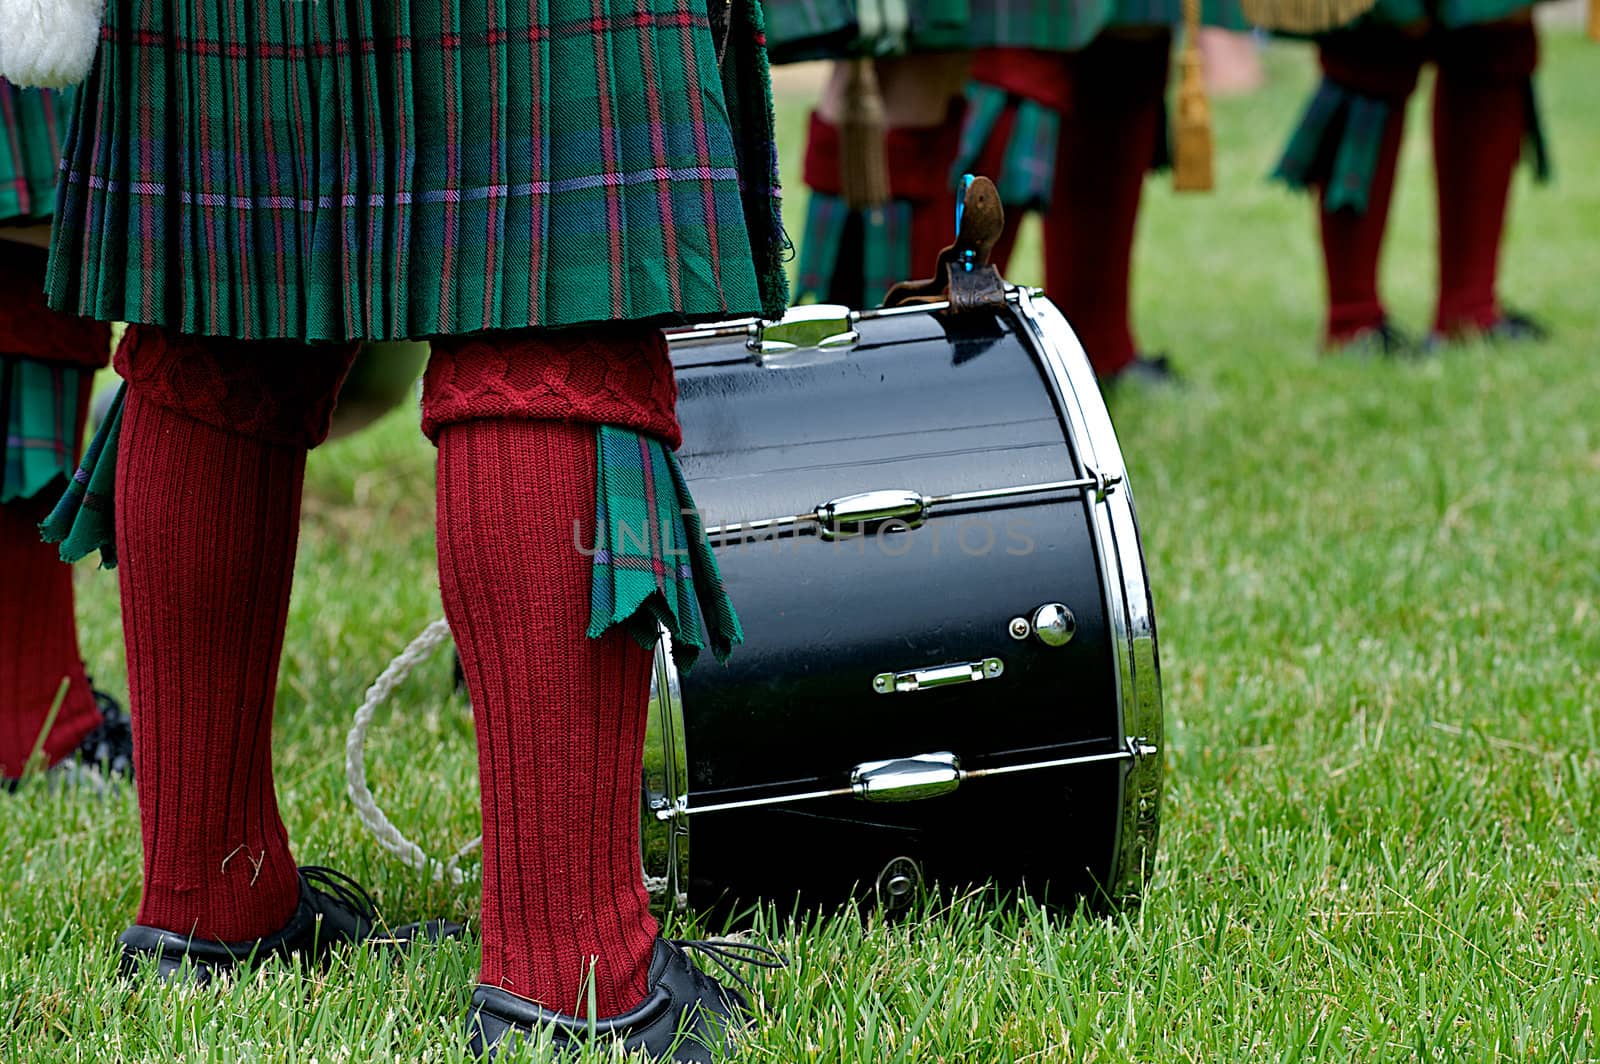 Scottish kilt and socks of a drummer in a bagpipe band showing the cultural heritage that exists in the US at a Memorial Day event.